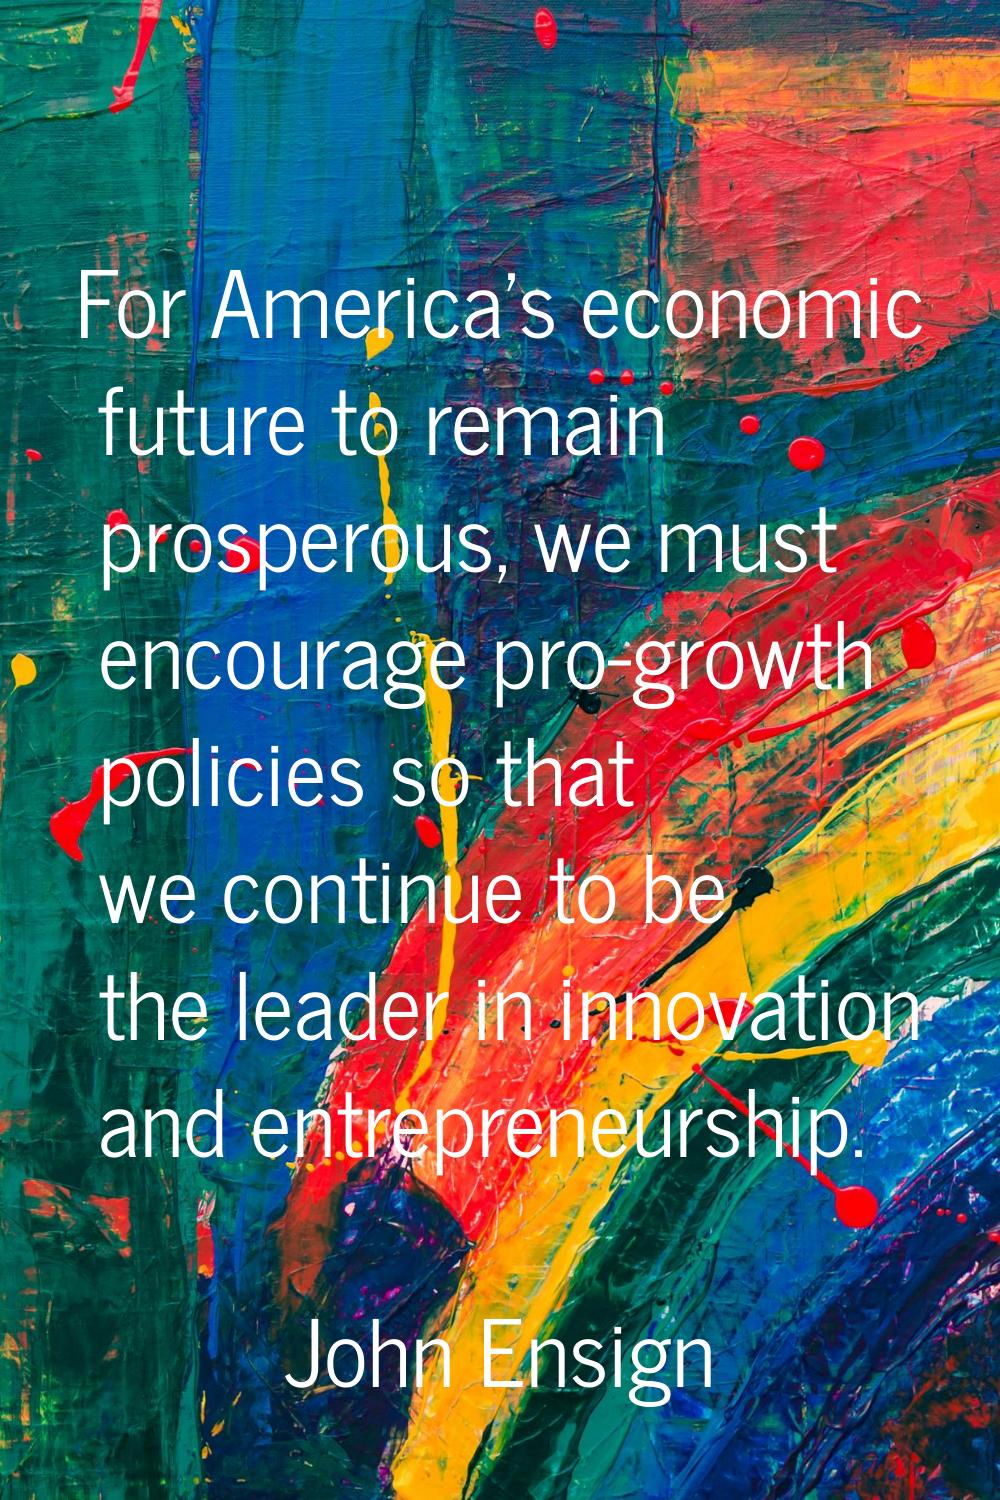 For America's economic future to remain prosperous, we must encourage pro-growth policies so that w